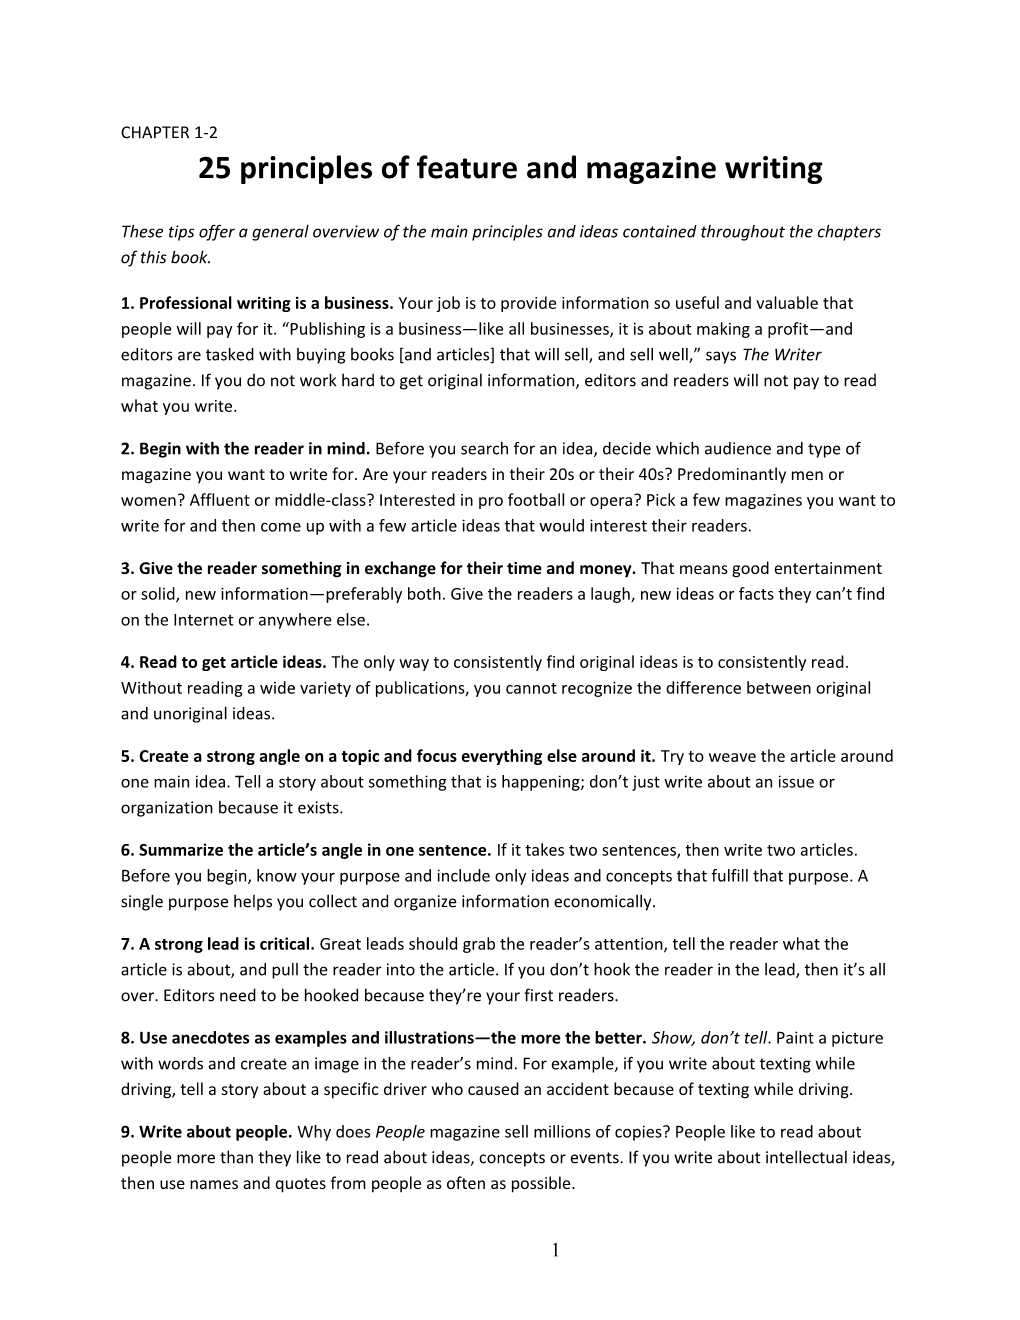 25 Rules of Magazine and Feature Writing